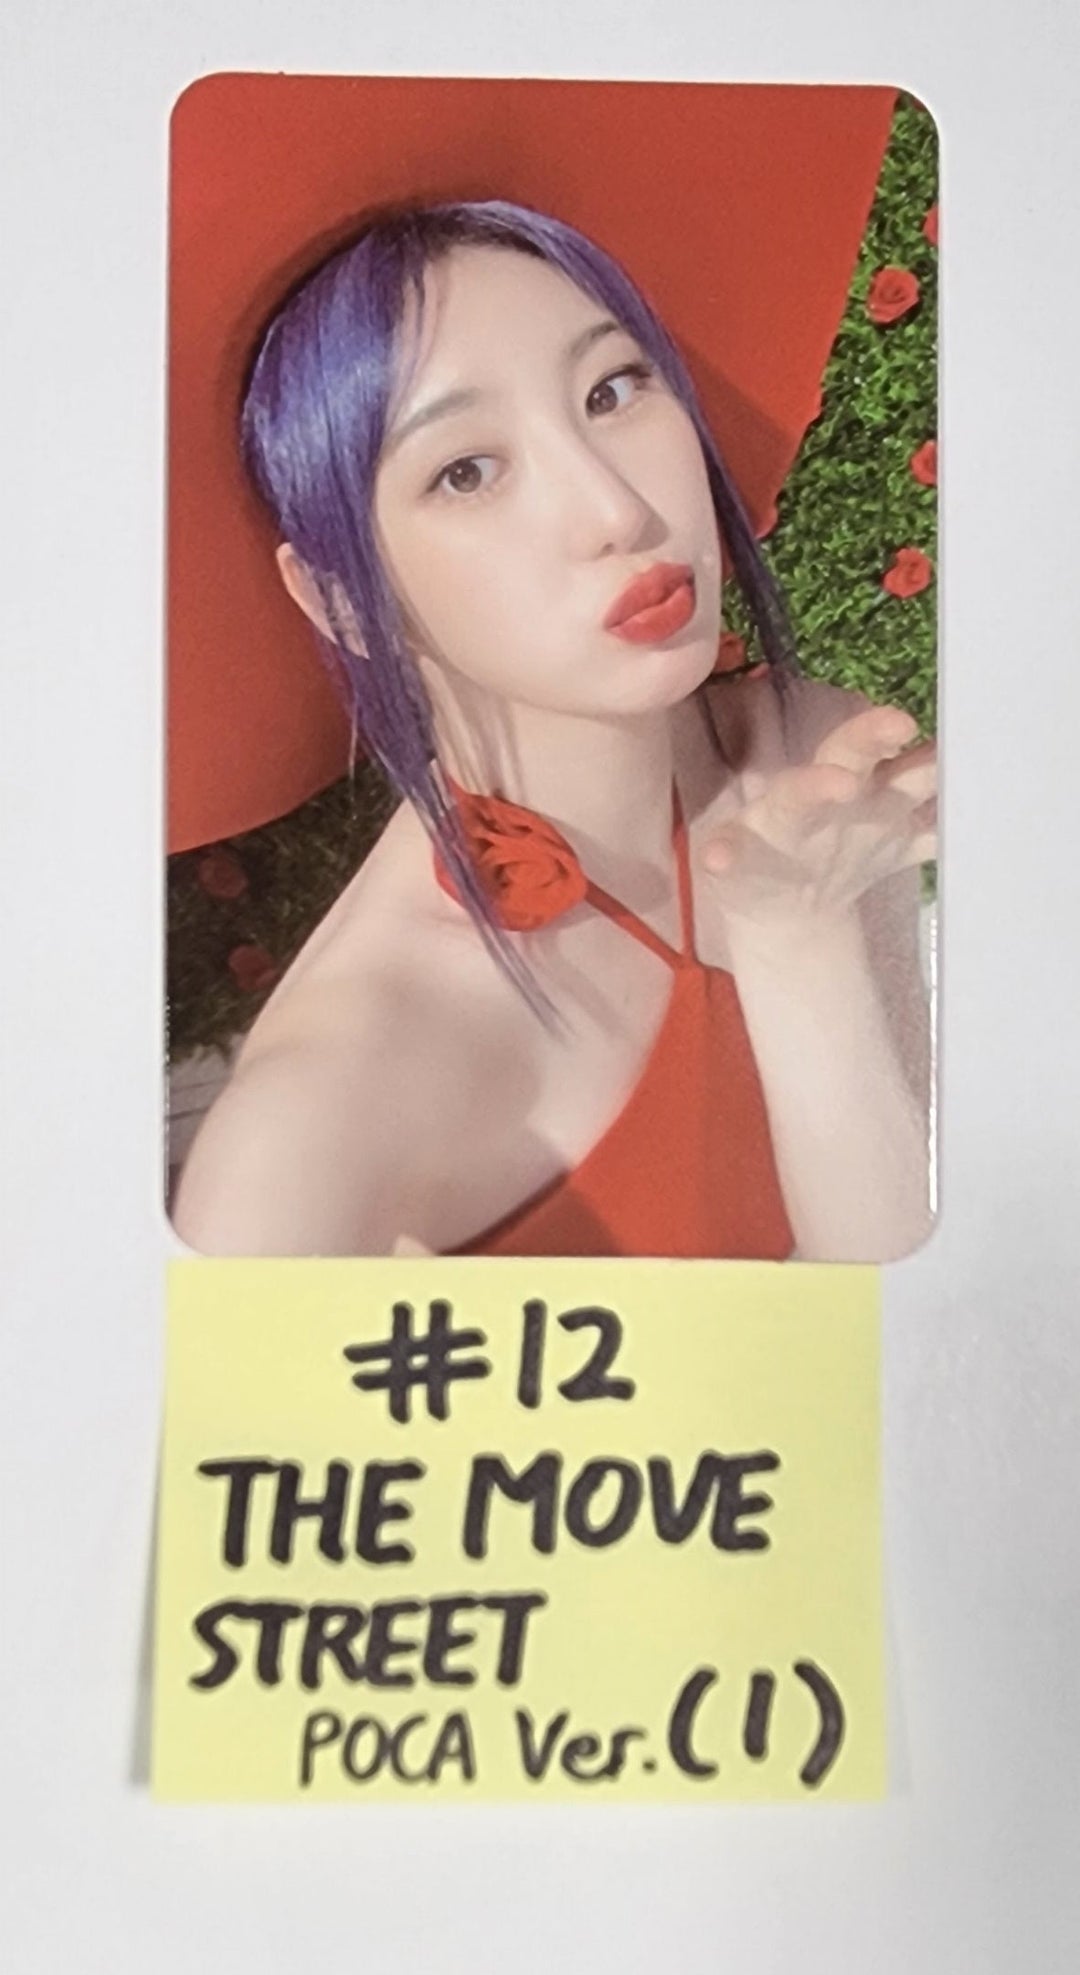 Lee Chae Yeon "The Move Street" - Official Photocard [Poca Ver] [Updated] [23.09.11]